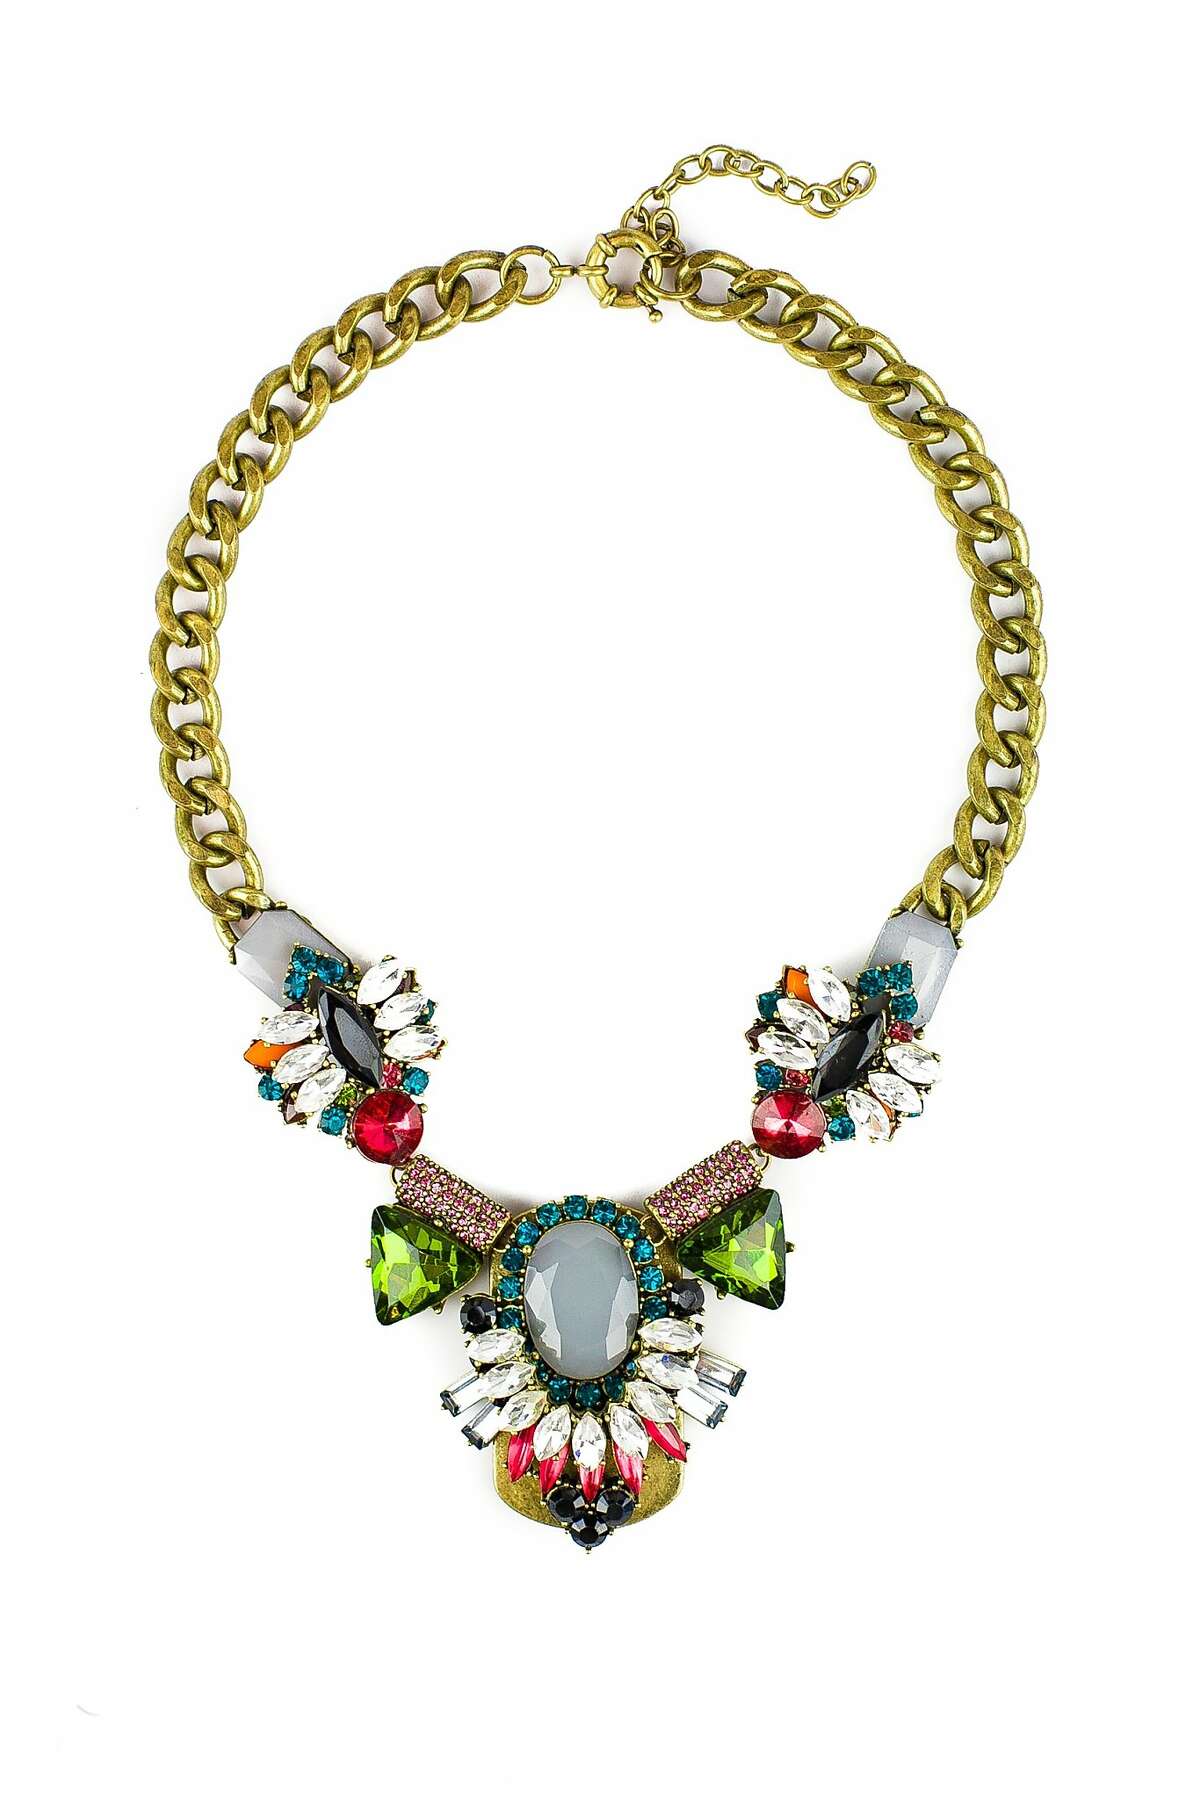 Statement necklaces that leave you speechless